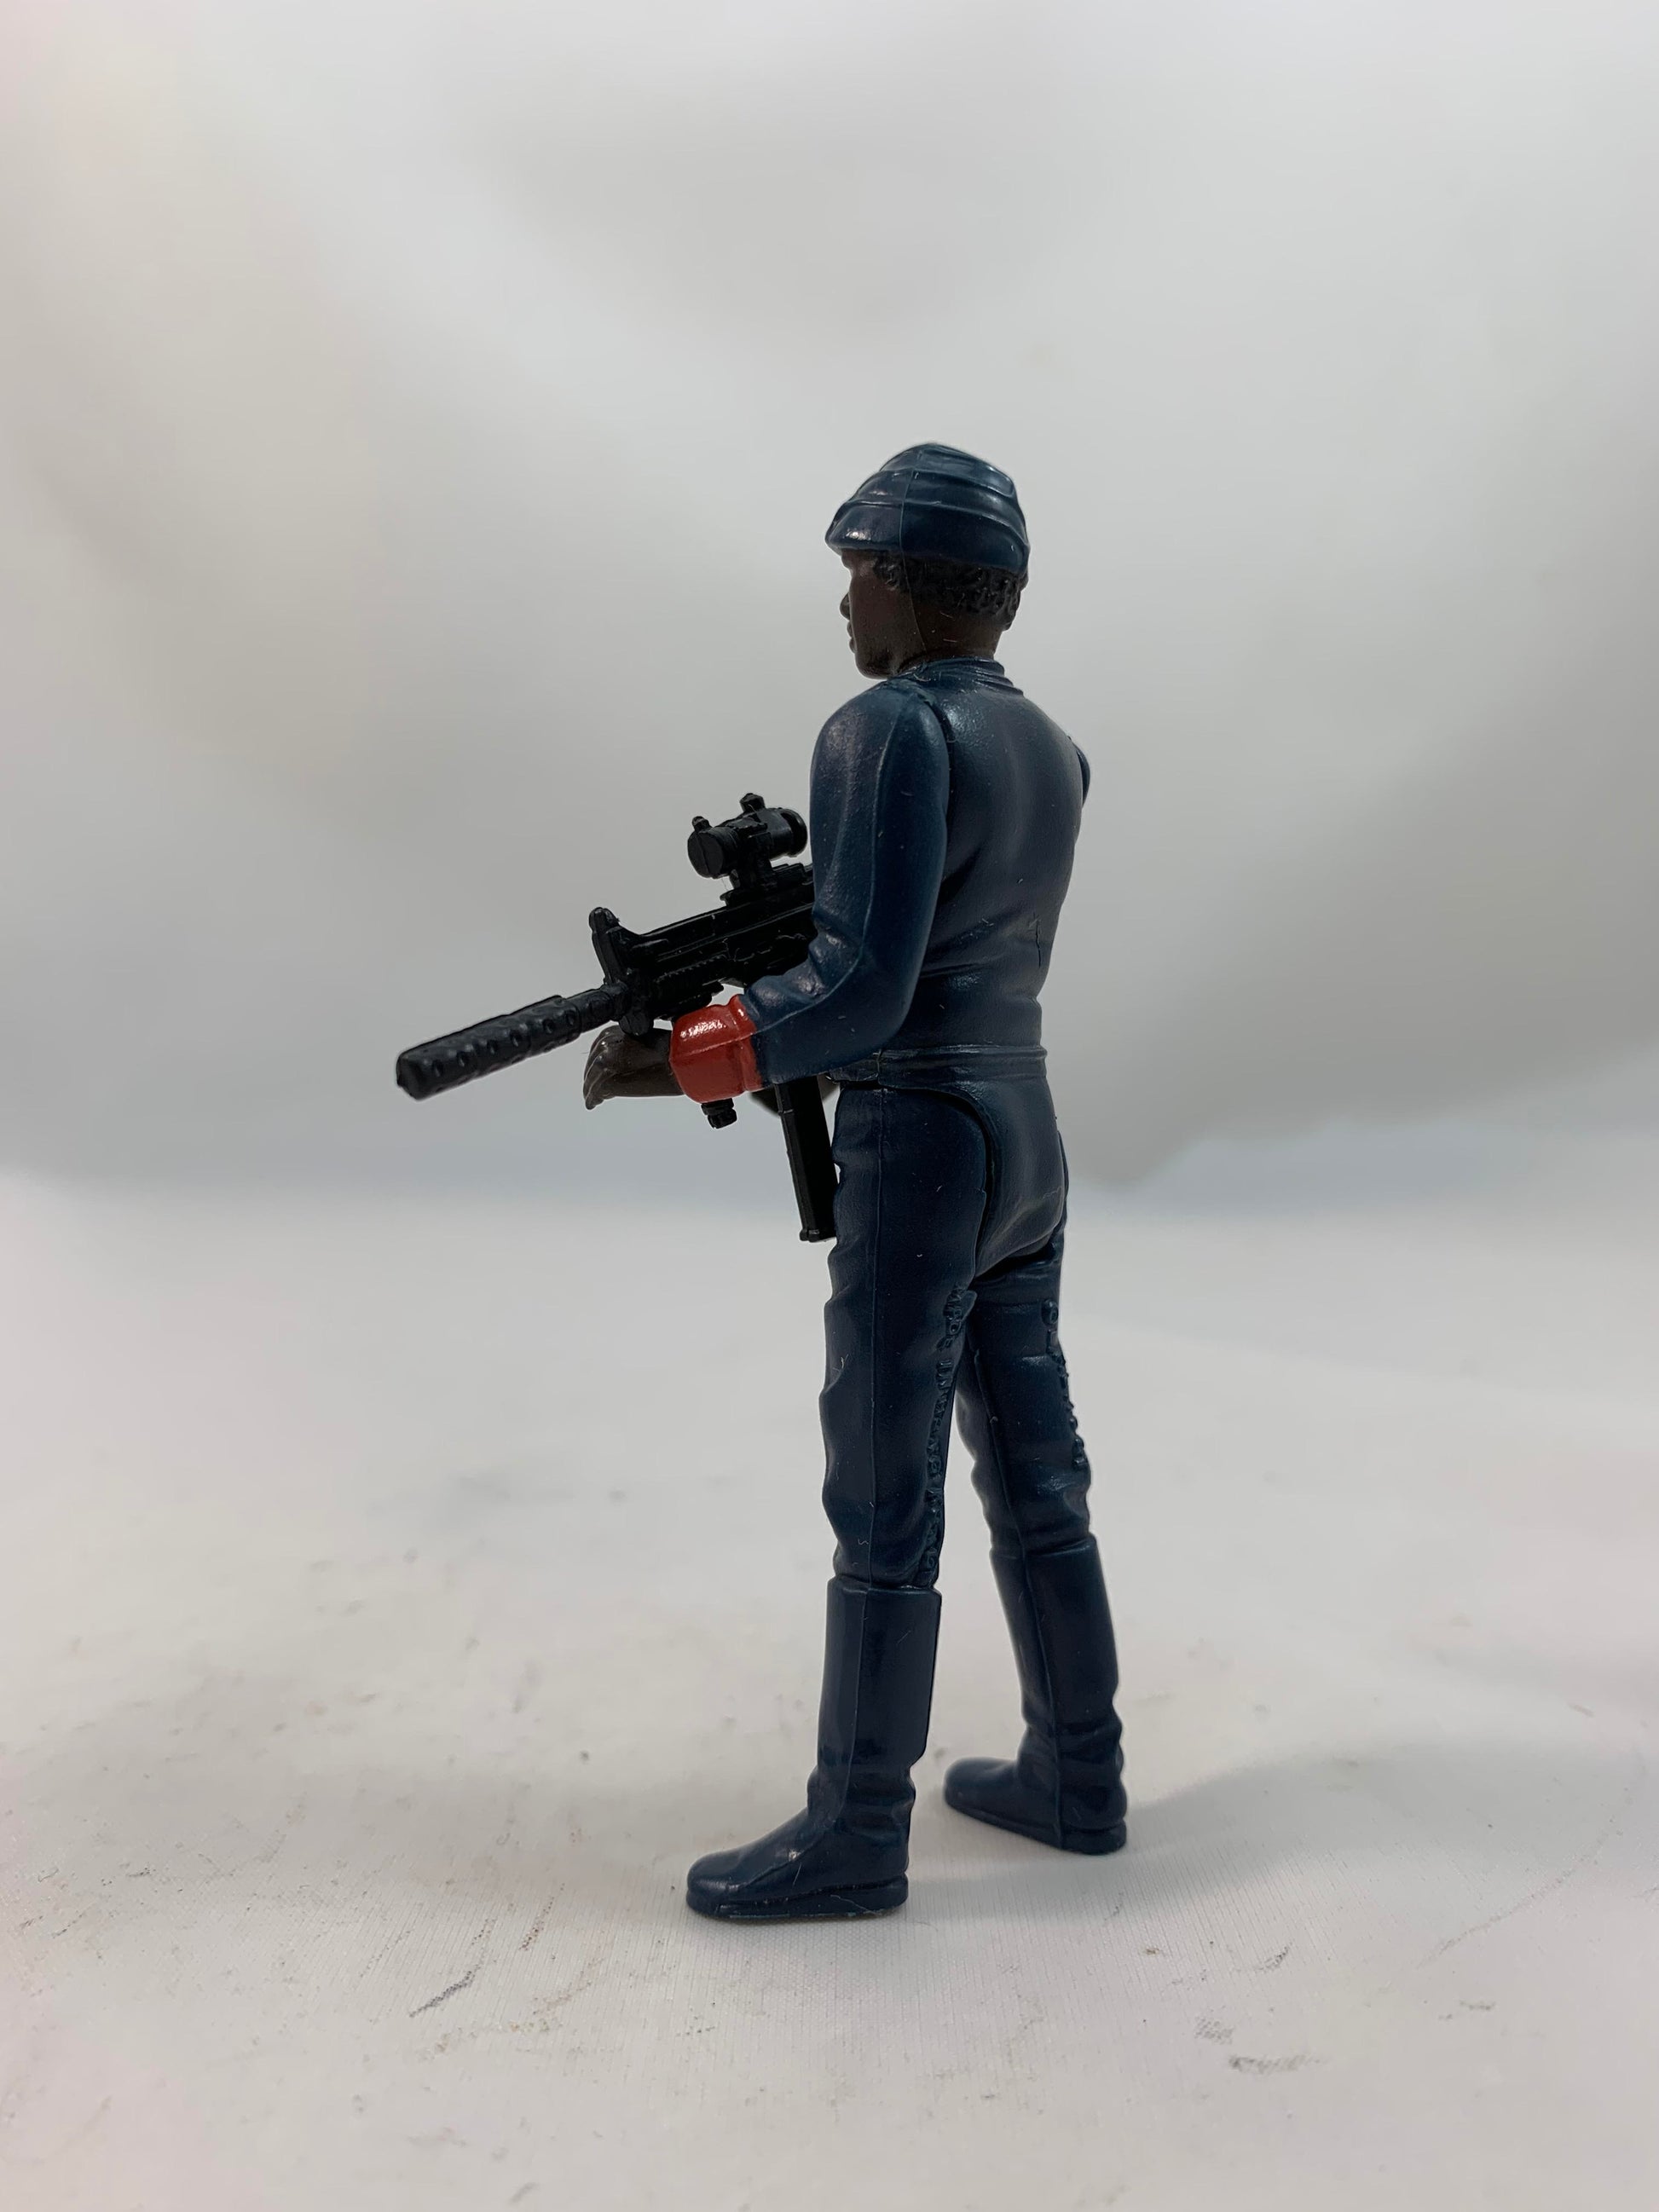 Kenner Vintage Star Wars TESB: The Empire Strikes Back Bespin Security Guard (Black) with Blaster Rifle COO 1981 LFL Hong Kong - Loose